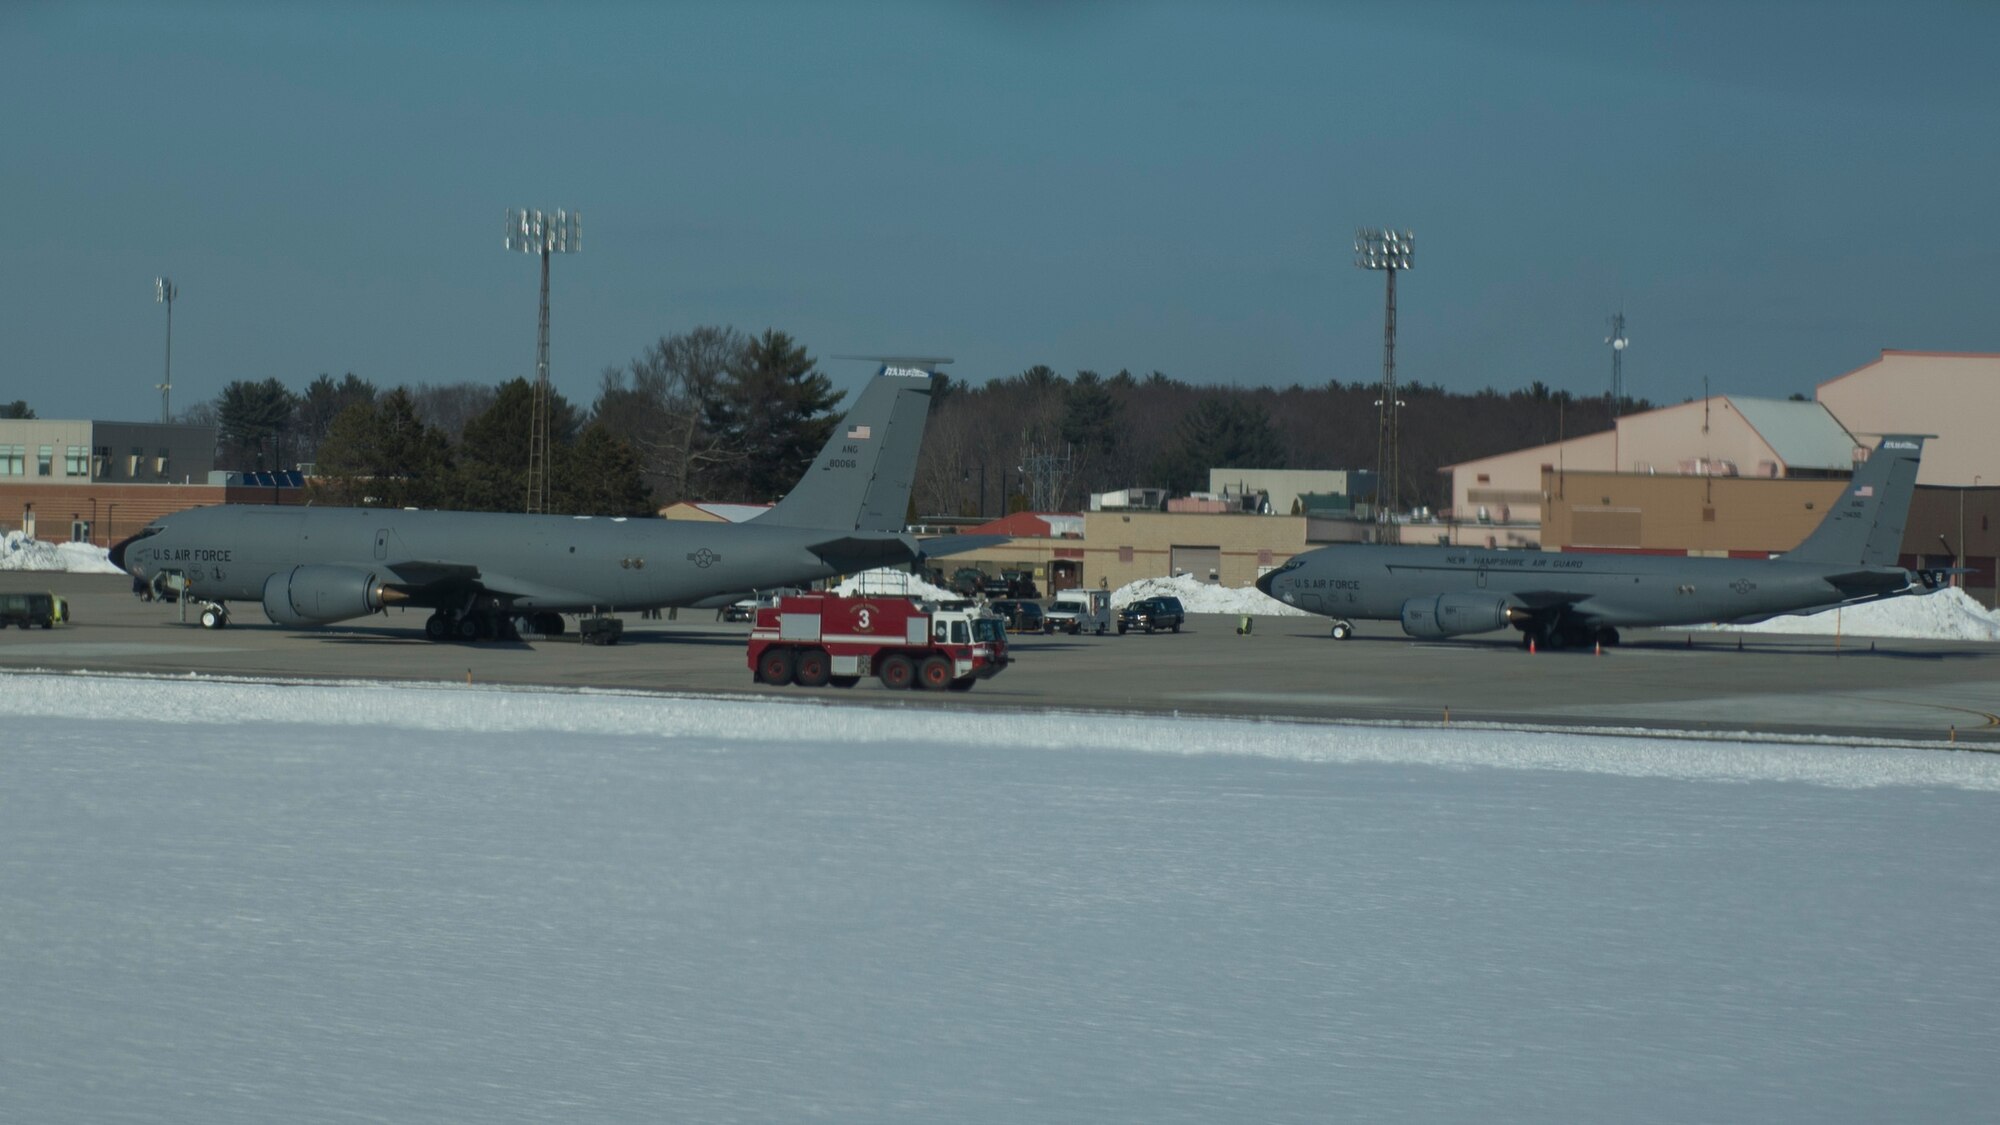 Two KC-135 Stratotankers assigned to the 157th Air Refueling Wing sit on the parking ramp at Pease Air National Guard Base, N.H., March 5, 2019. The 157 ARW is divesting all of its KC-135s by March 24, 2019, in order to prepare for the arrival of the new KC-46A tanker later this year. (U.S. Air National Guard Photo by Master Sgt. Thomas Johnson)